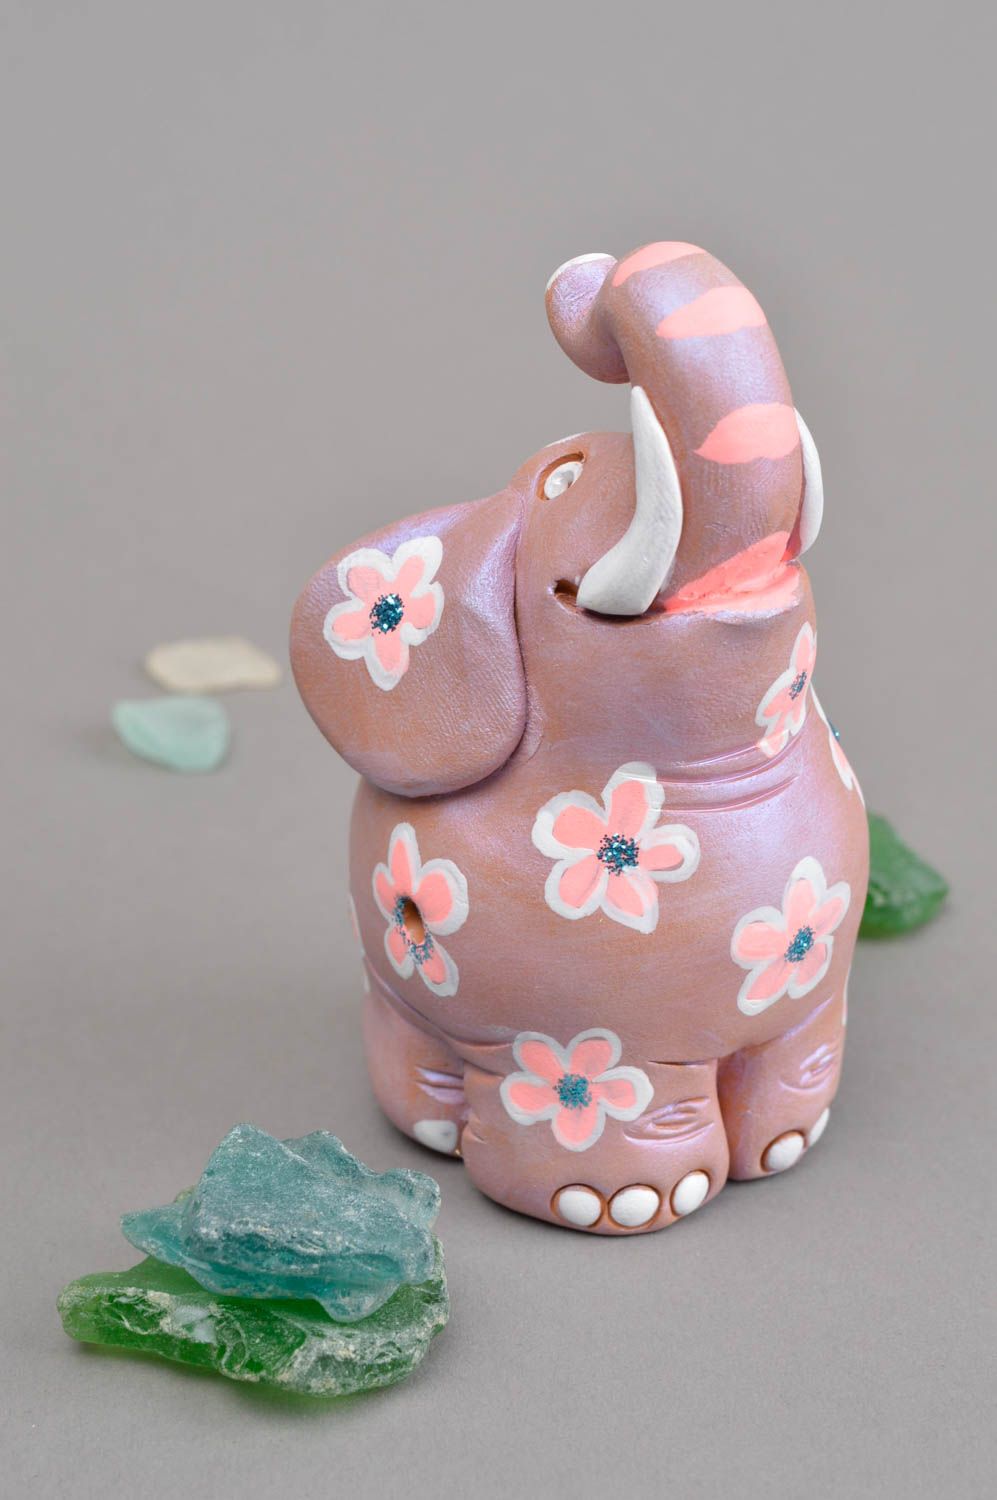 Handmade ceramic whistle clay statuette clay whistle handmade figurine for baby photo 1